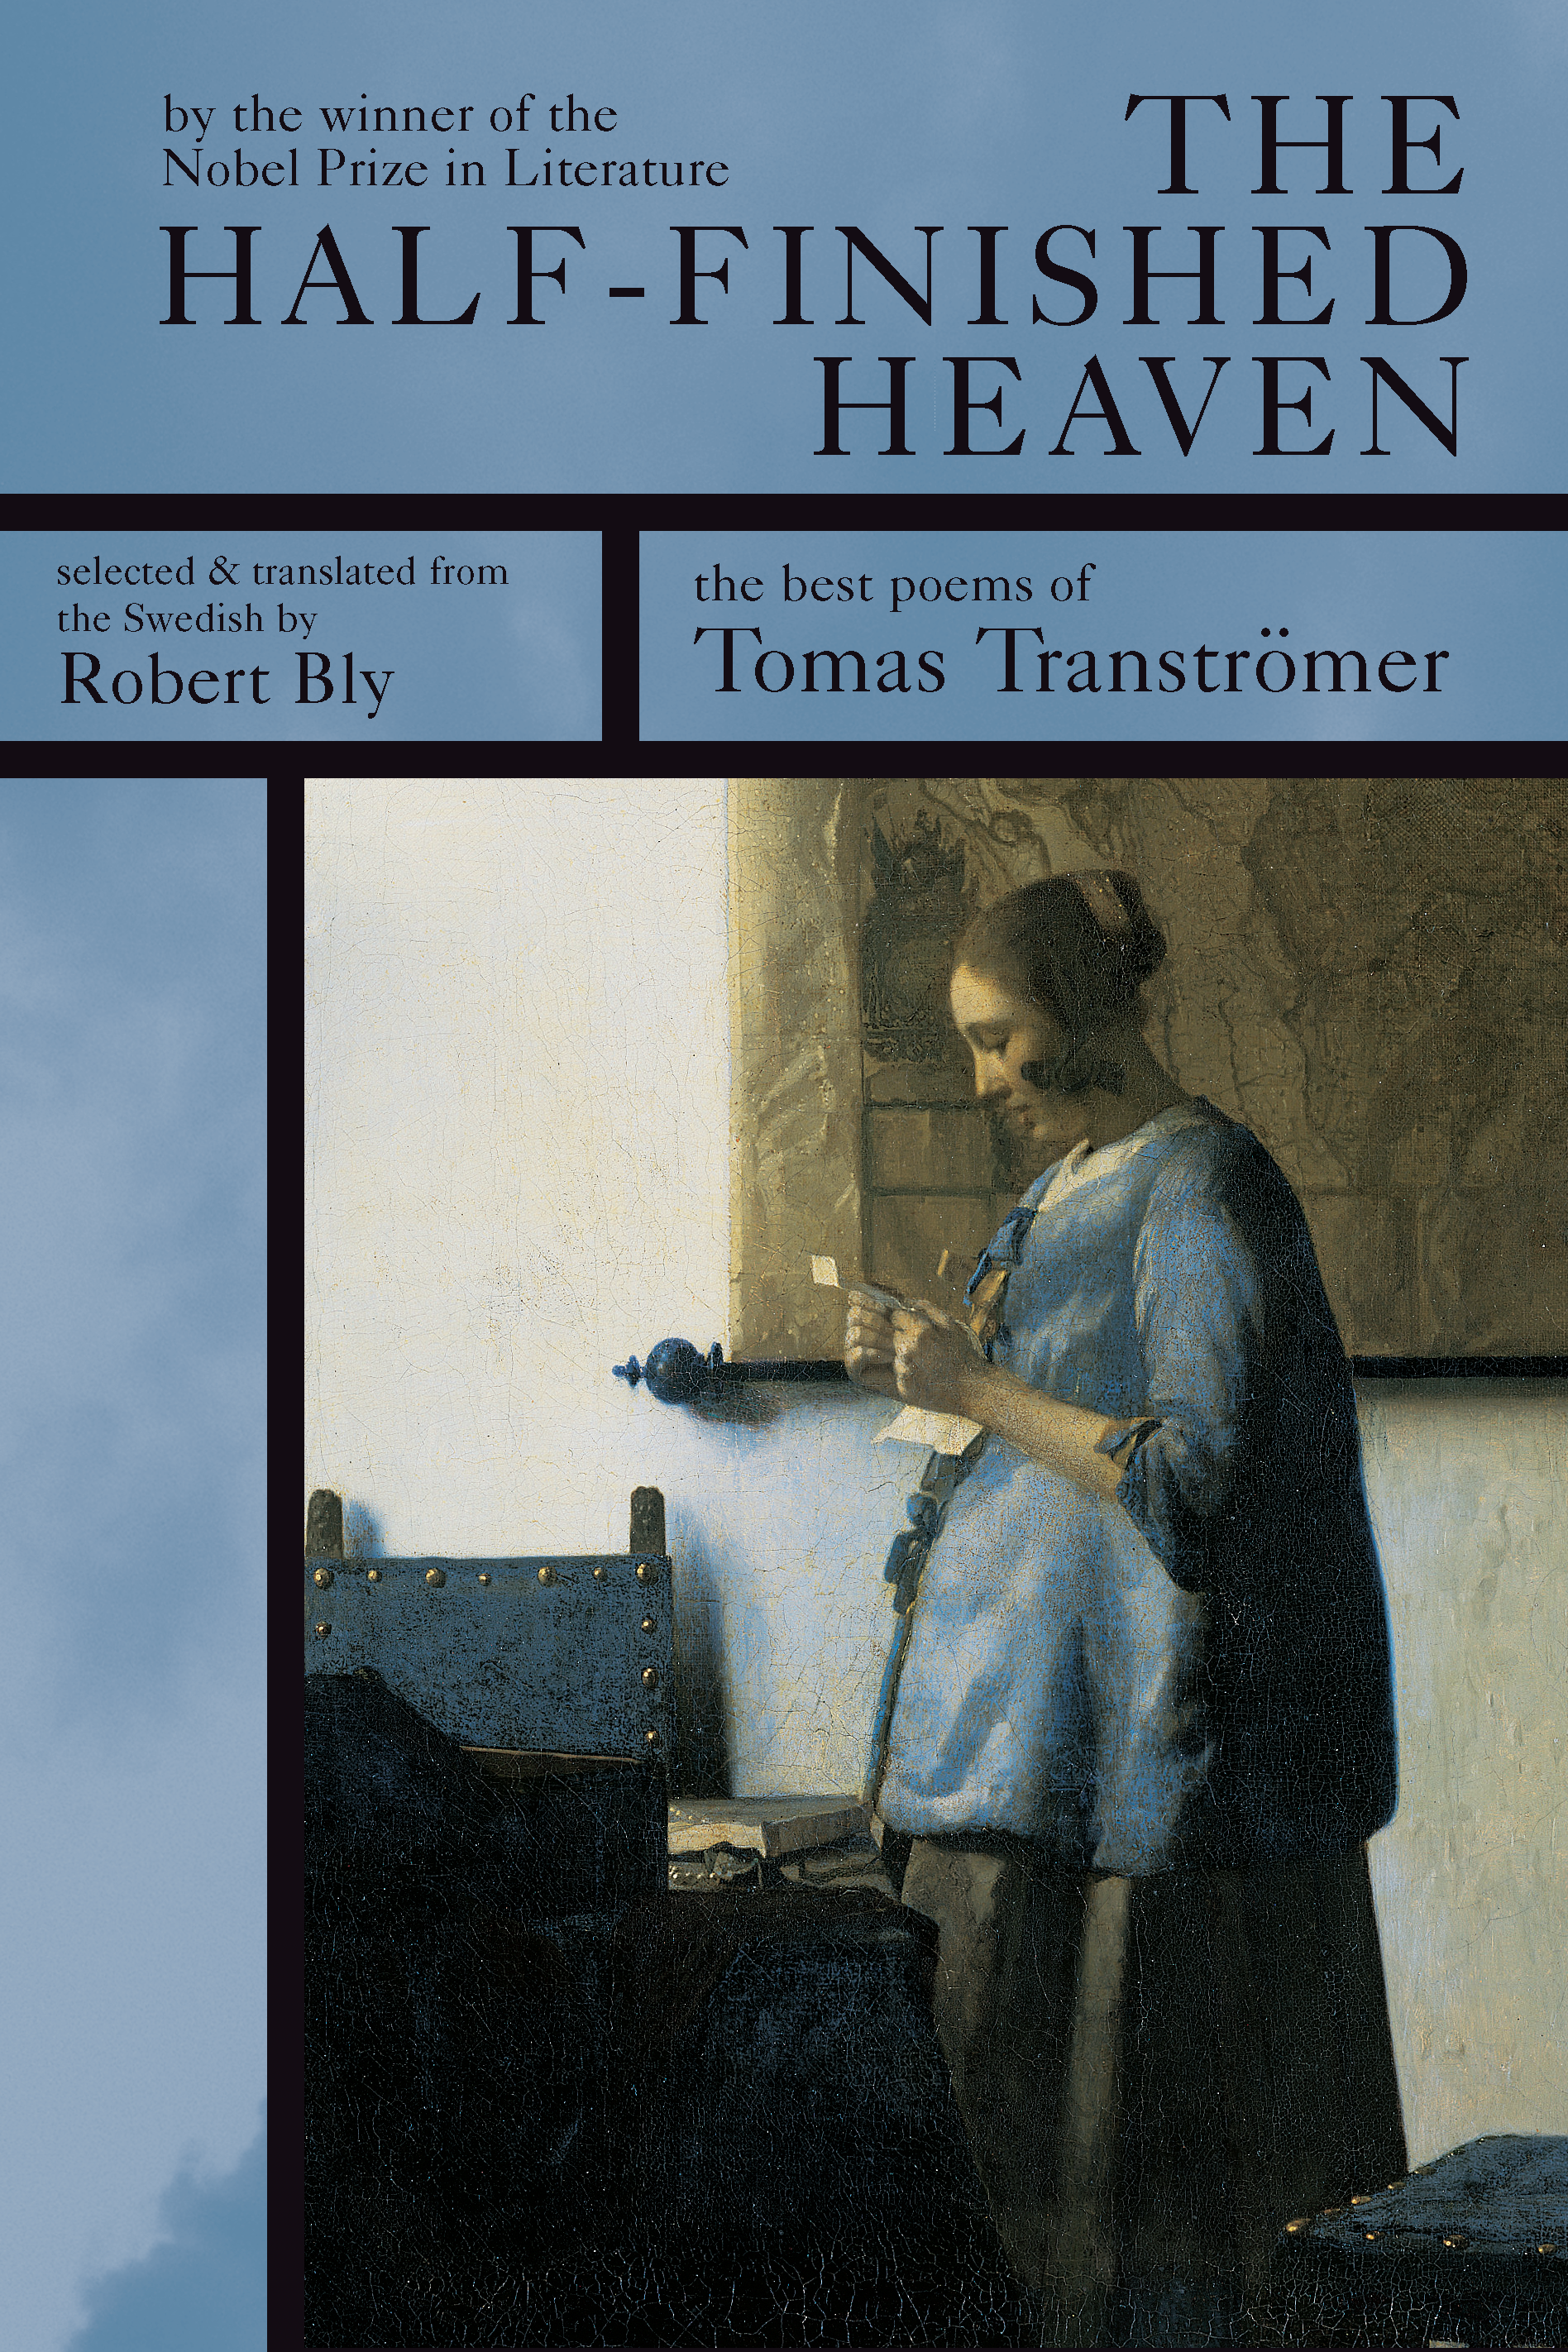 Tomas Tranströmer's The Half Finished Heaven book cover